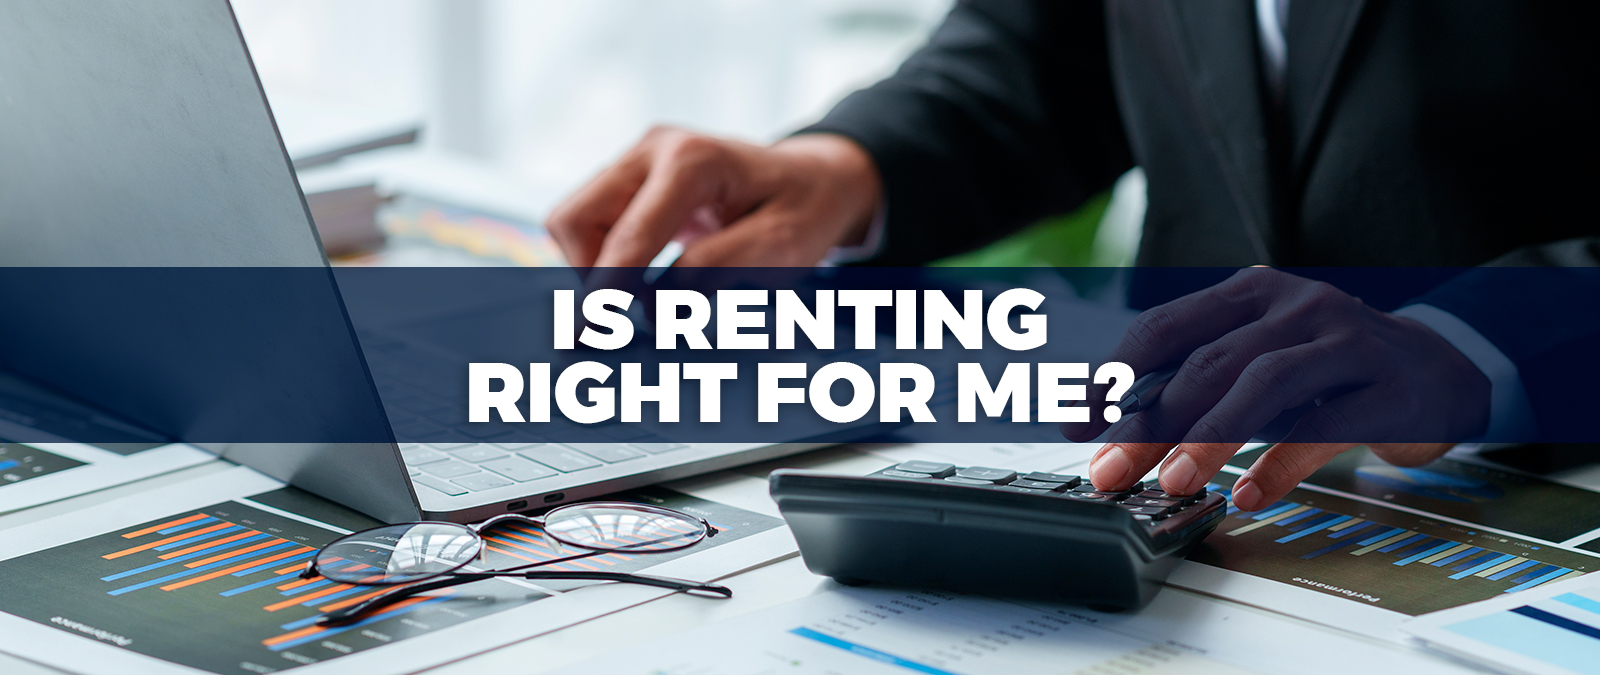 Is Renting Right for me?